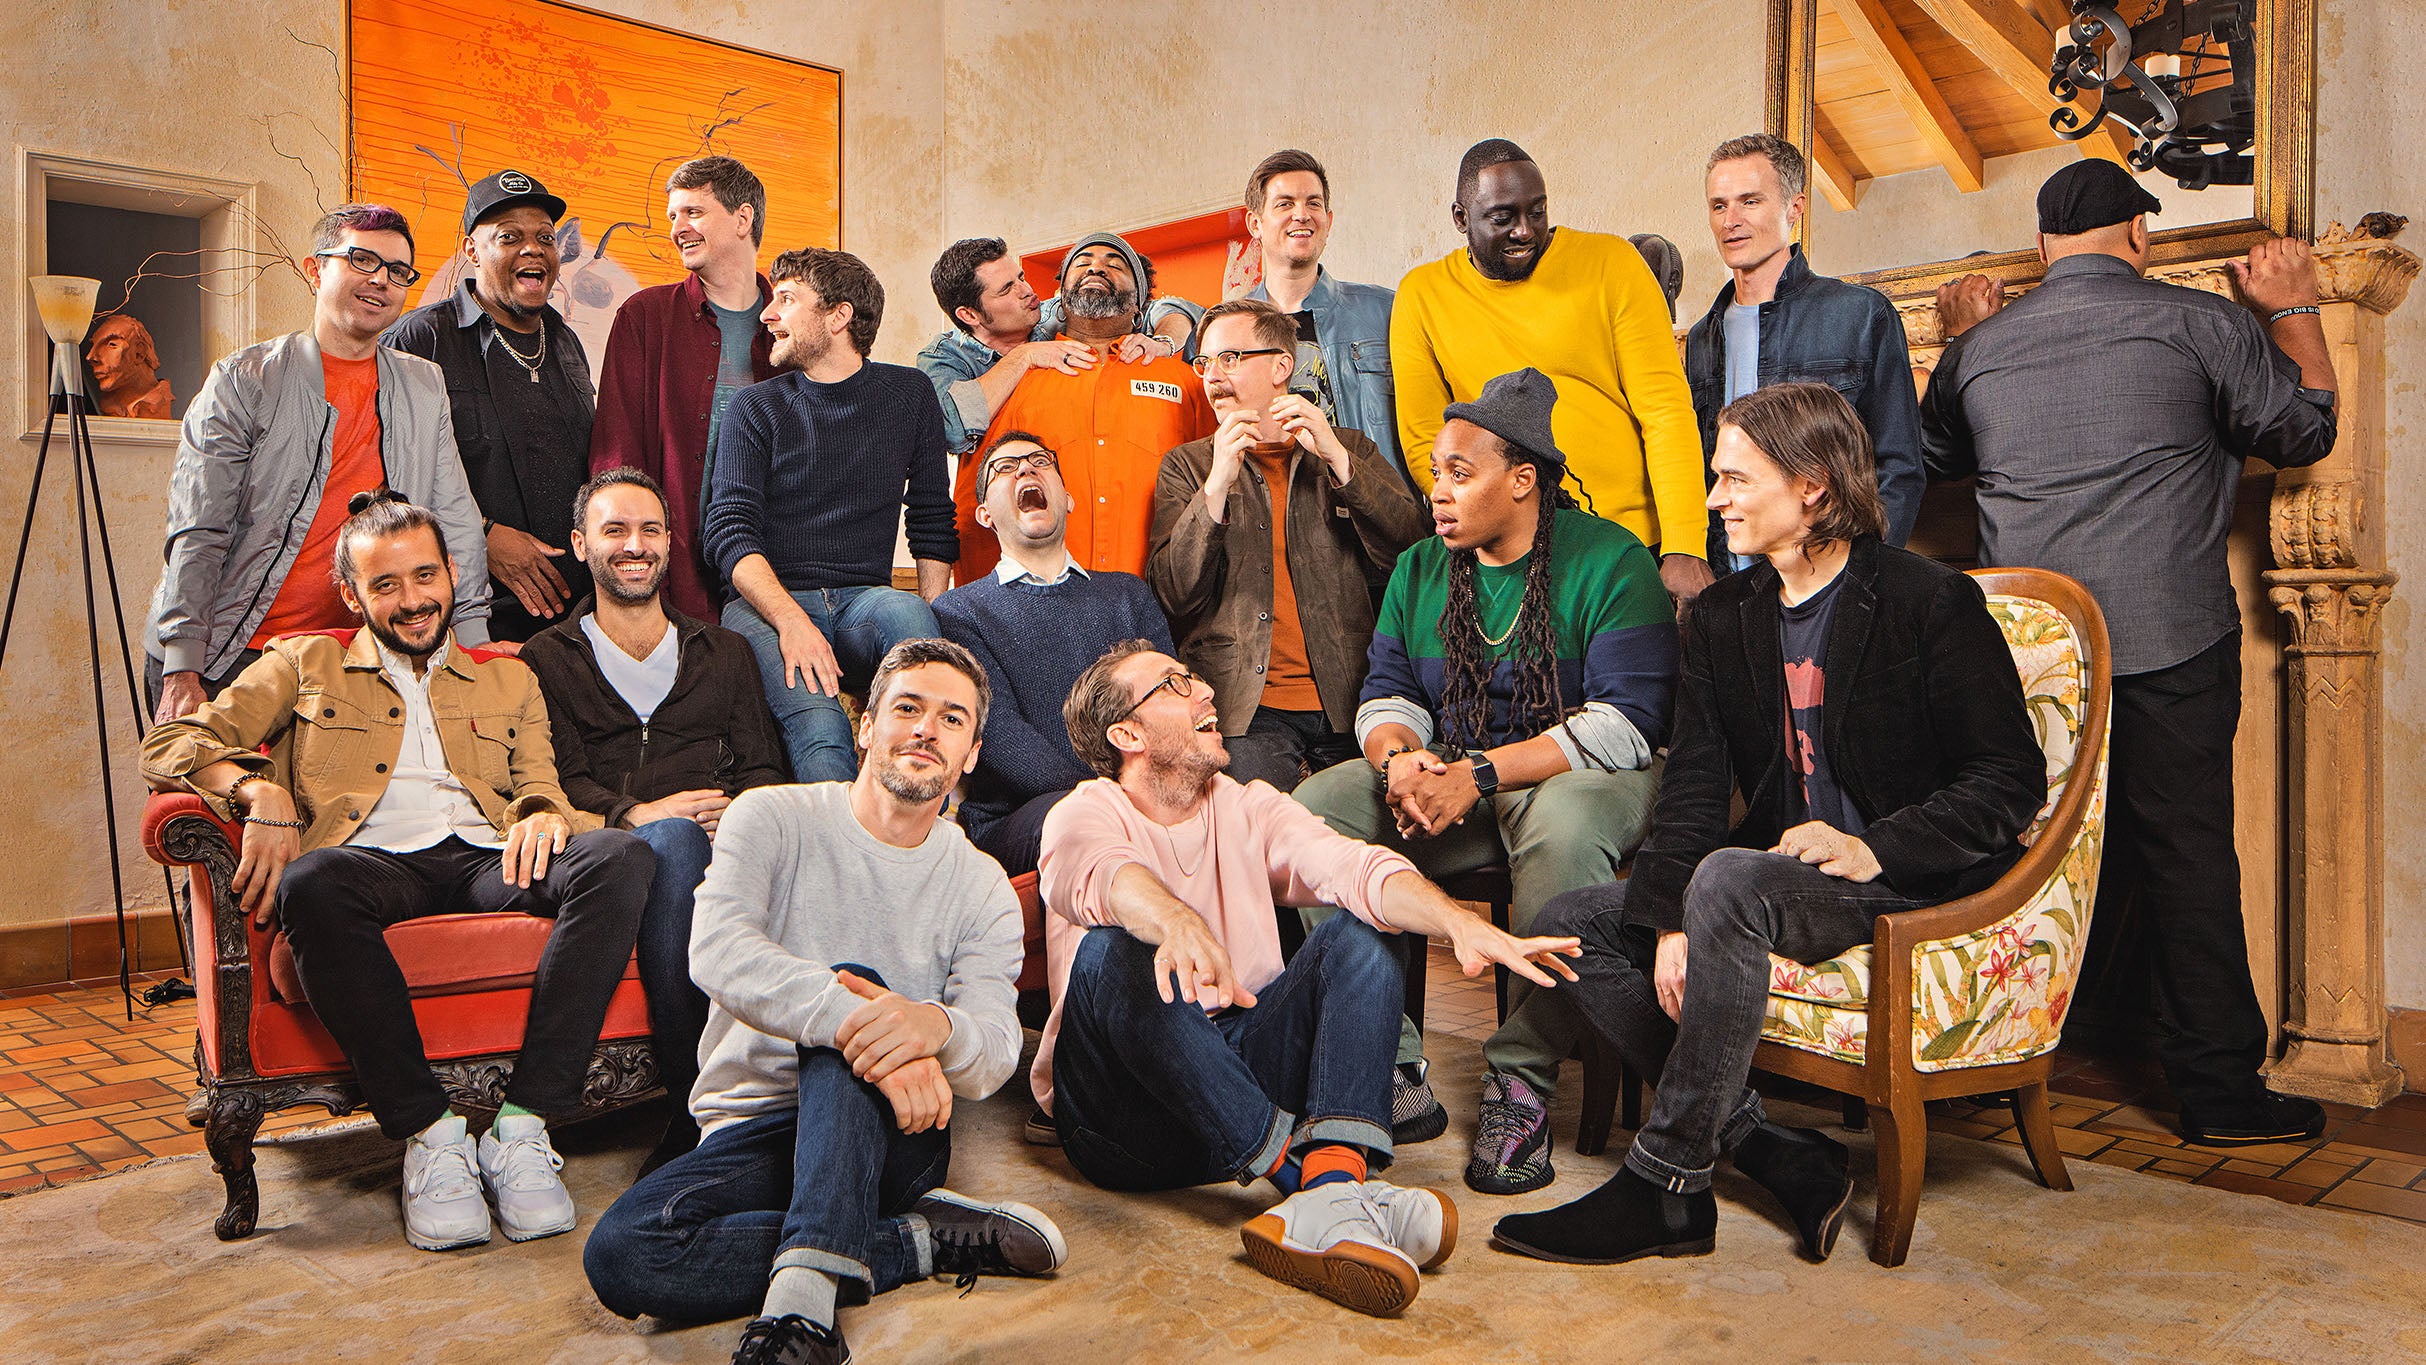 presale code to Snarky Puppy affordable tickets in Seattle